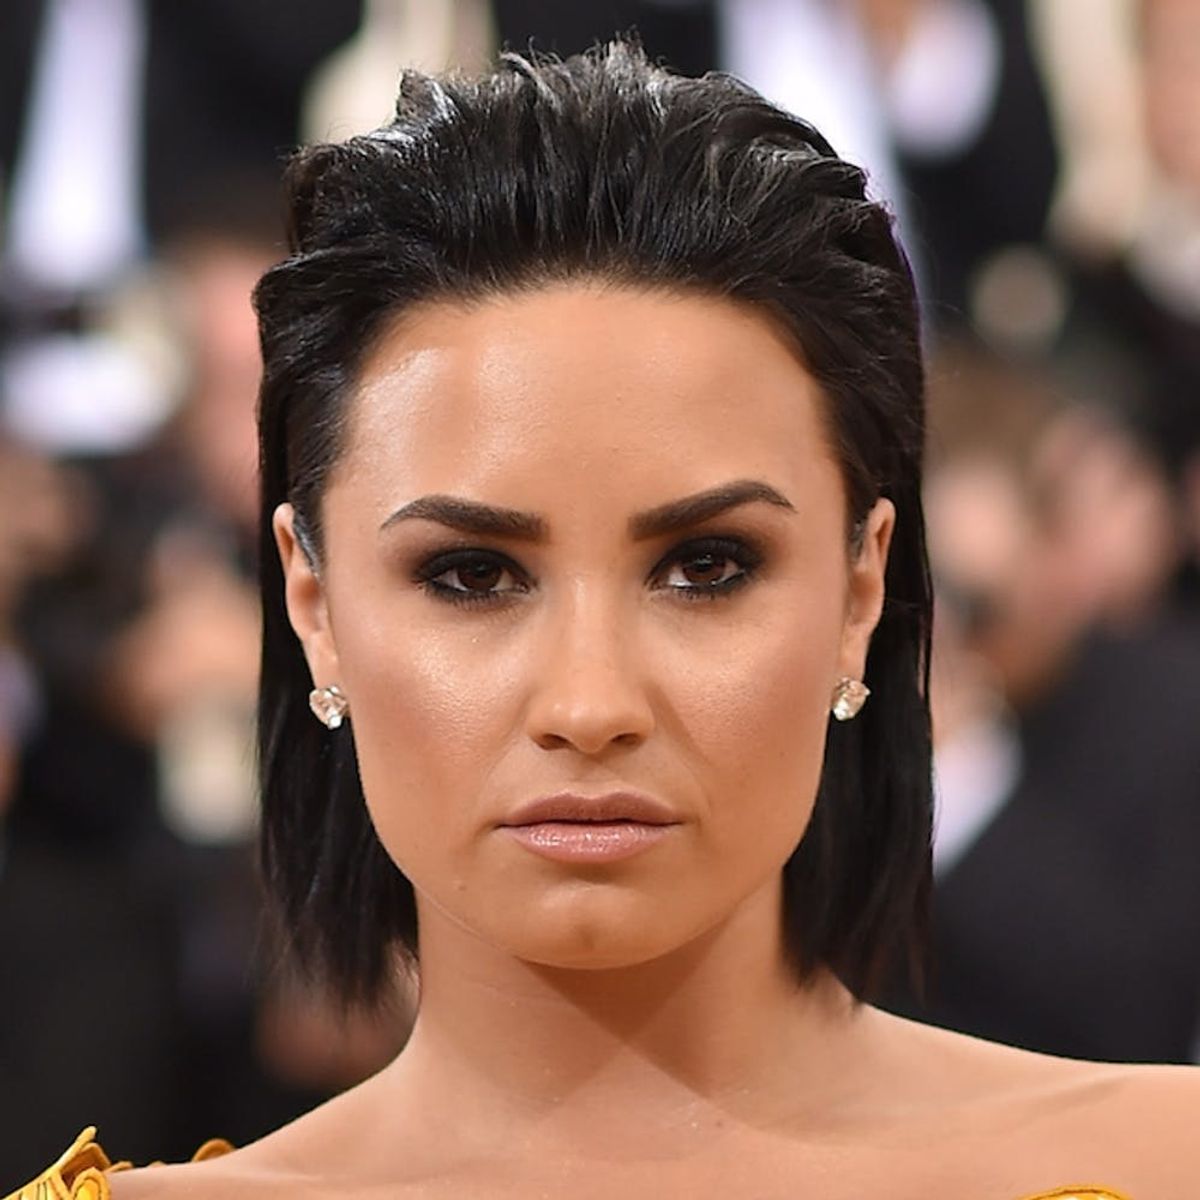 Demi Lovato’s Apology for Laughing About Zika on Social Media Is, Umm, Interesting